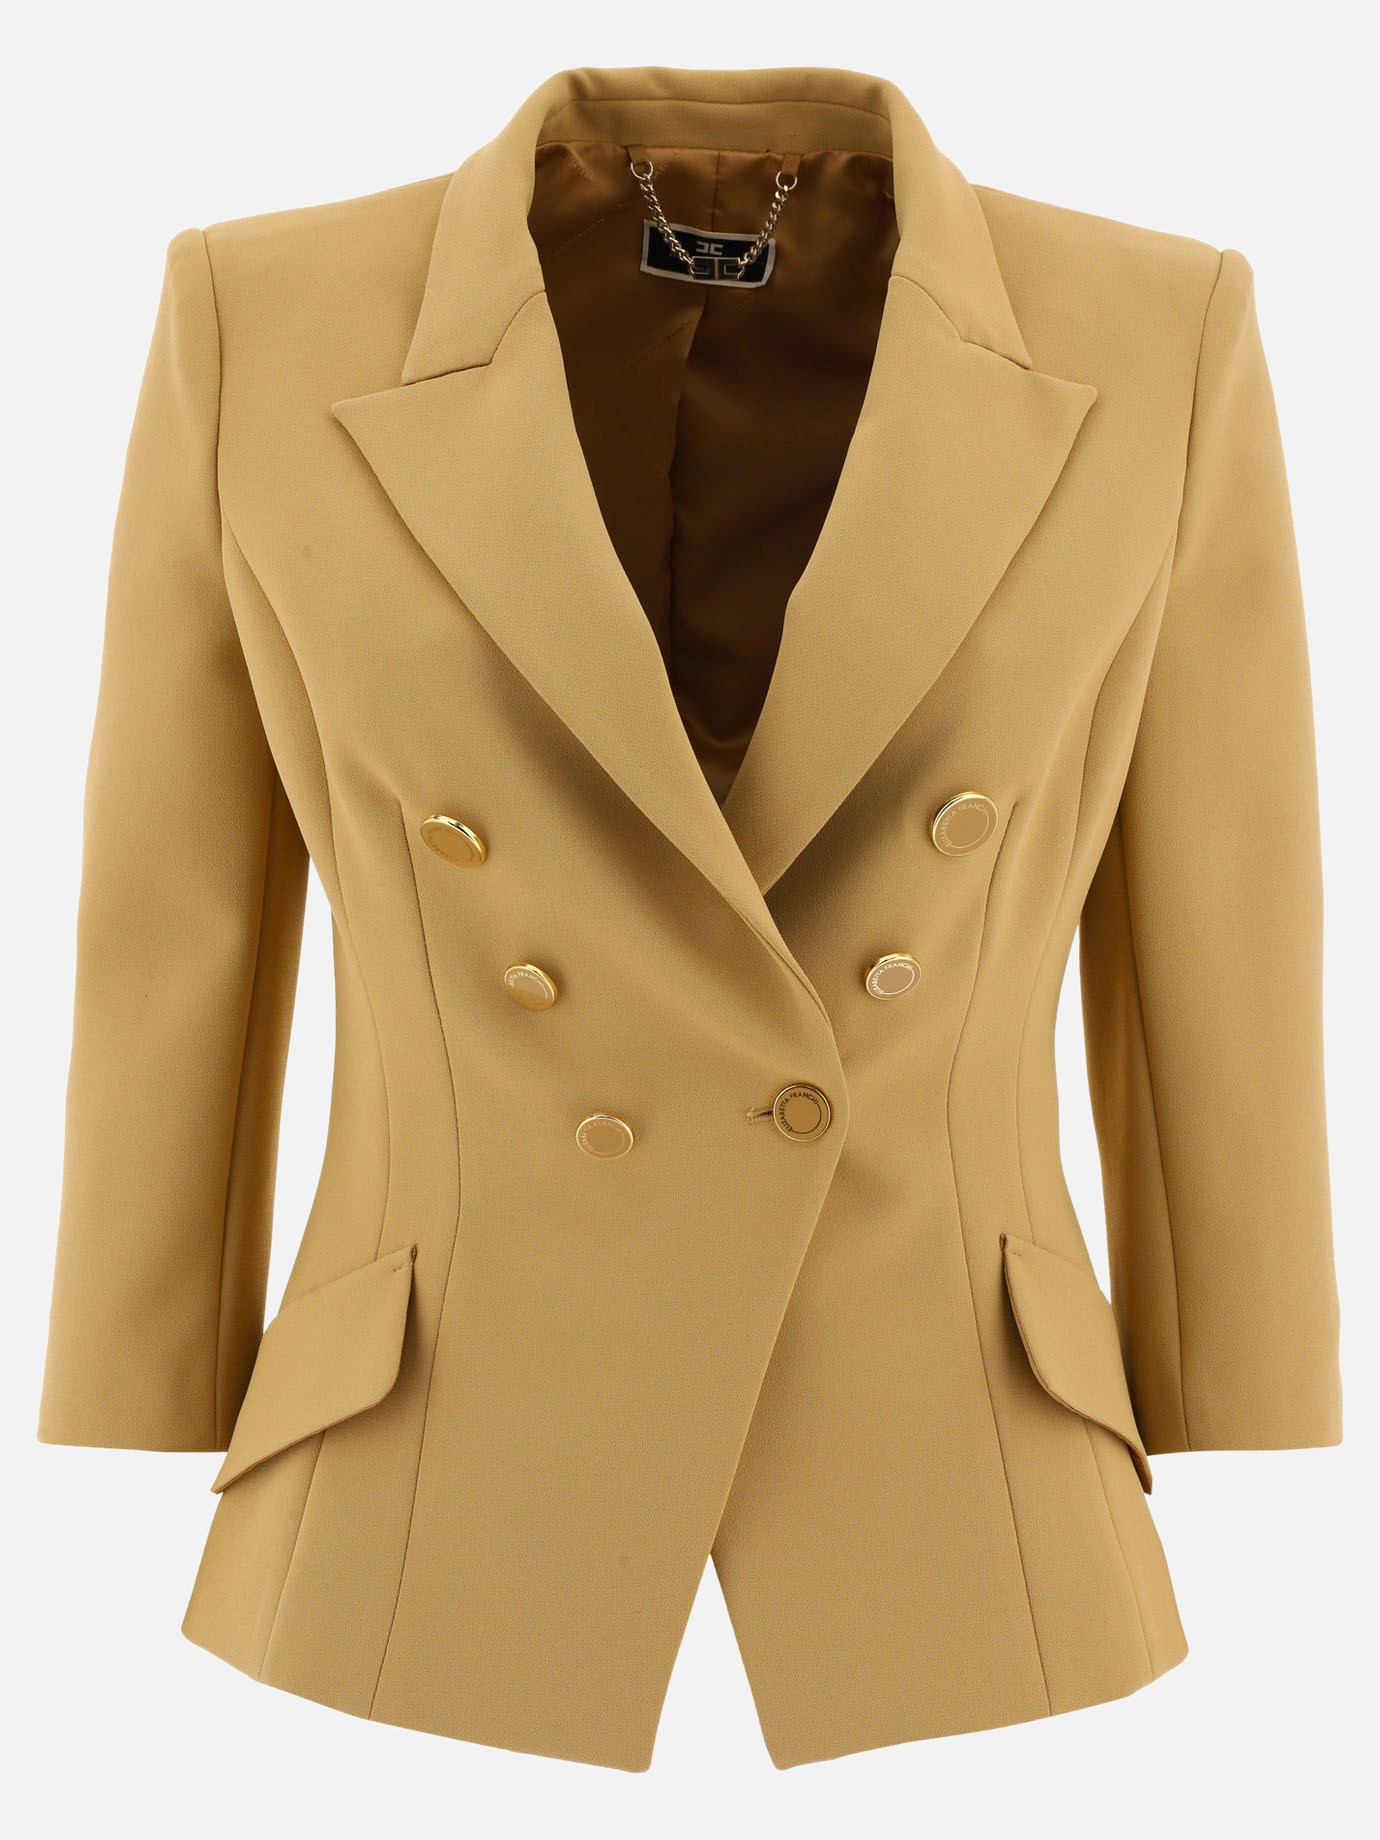 Double-breasted blazer with gold buttonsby Elisabetta Franchi - 2